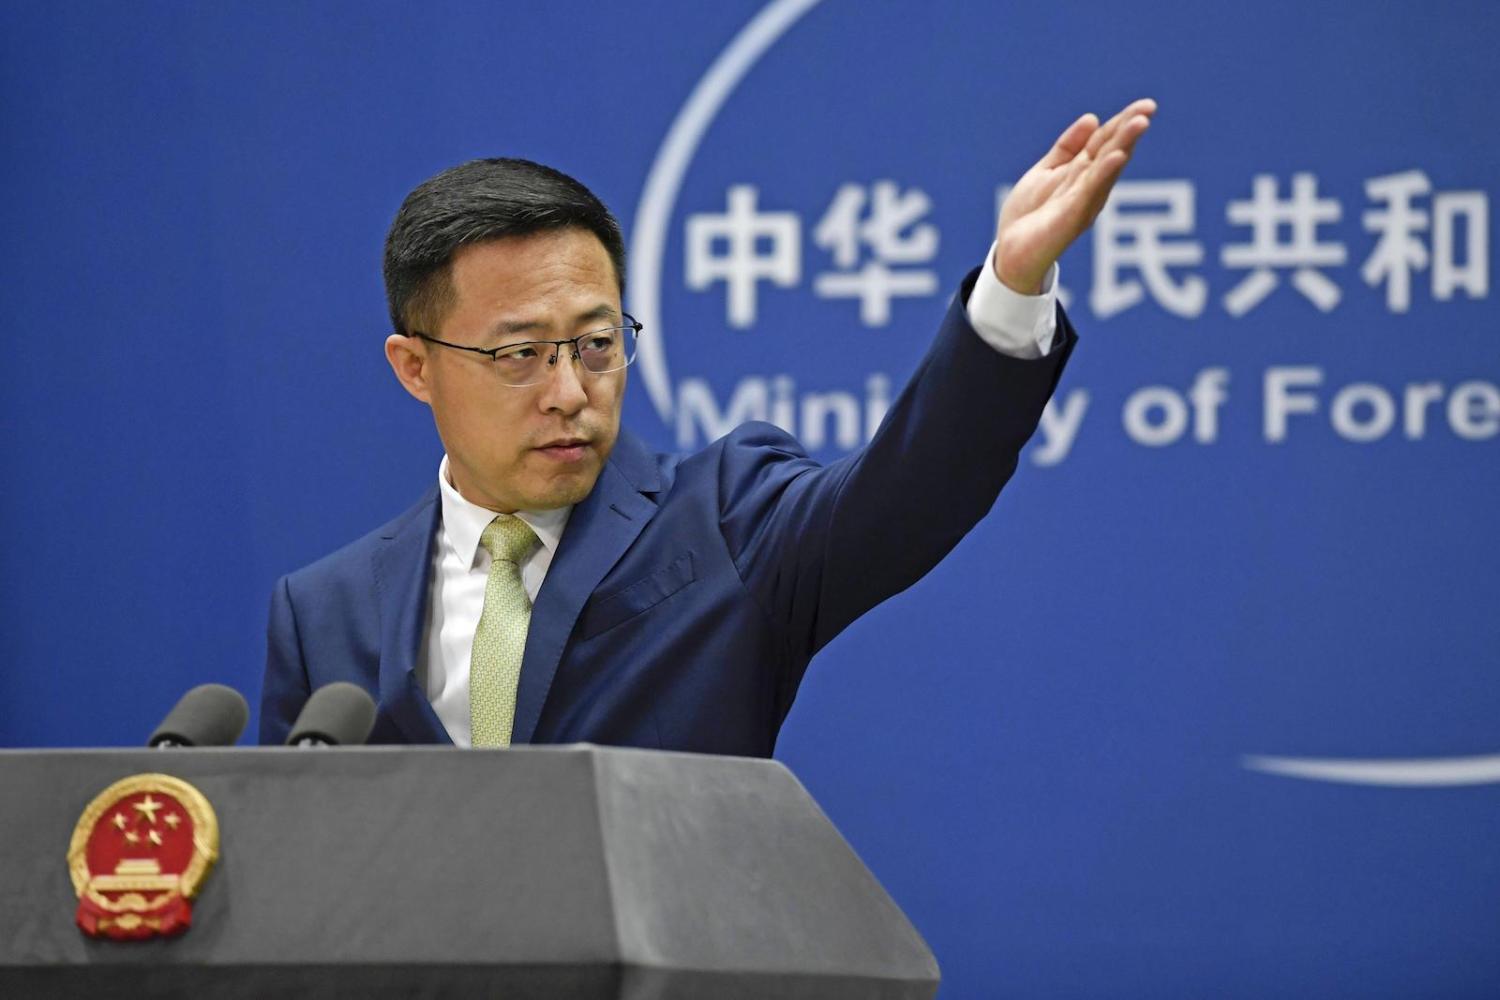 Chinese Foreign Ministry spokesman Zhao Lijian during a press conference in Beijing (Kyodo News via Getty Images)